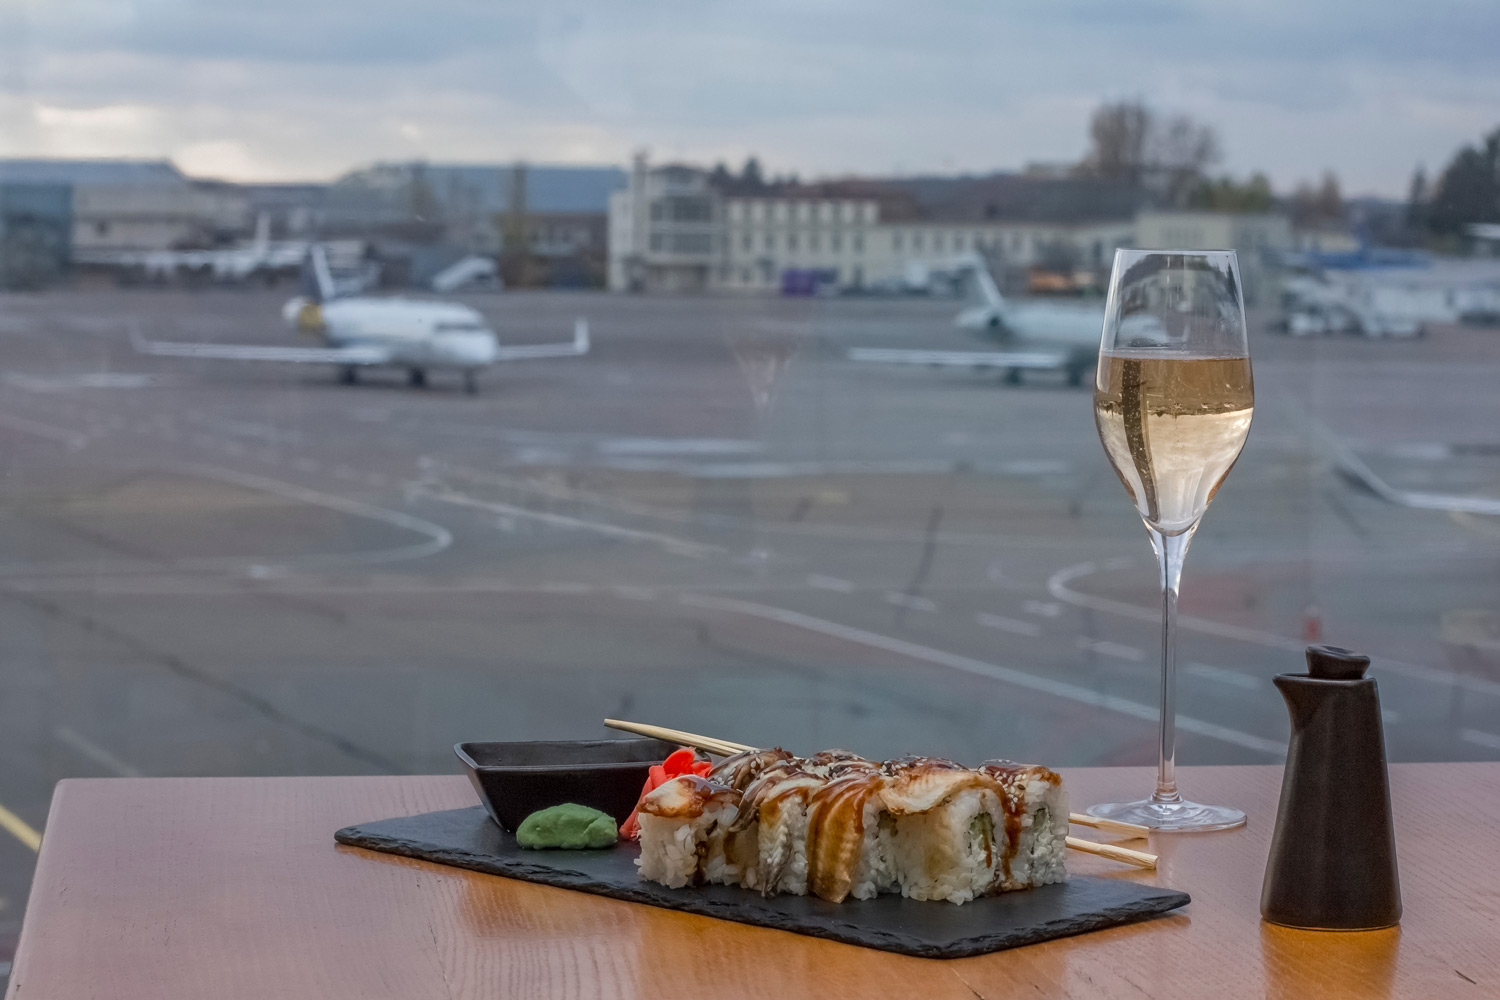 Meal With a View of An Airport Runway - Best Dining Options in Airports